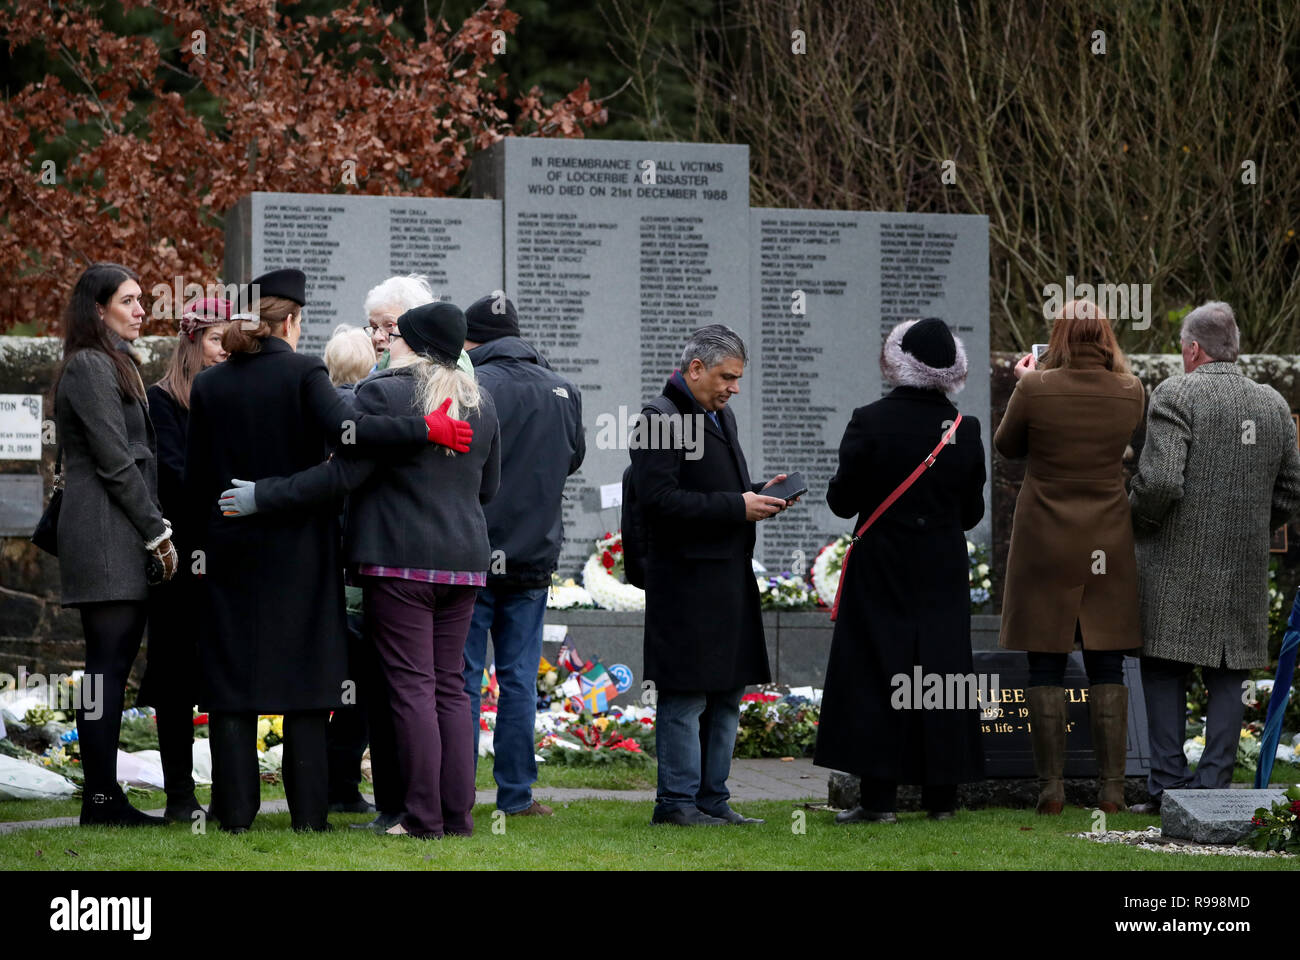 People gather to pay their respects at the commemoration service to mark the 30th anniversary of the Lockerbie bombing at the Memorial Garden, Dryfesdale Cemetery, Lockerbie. Stock Photo